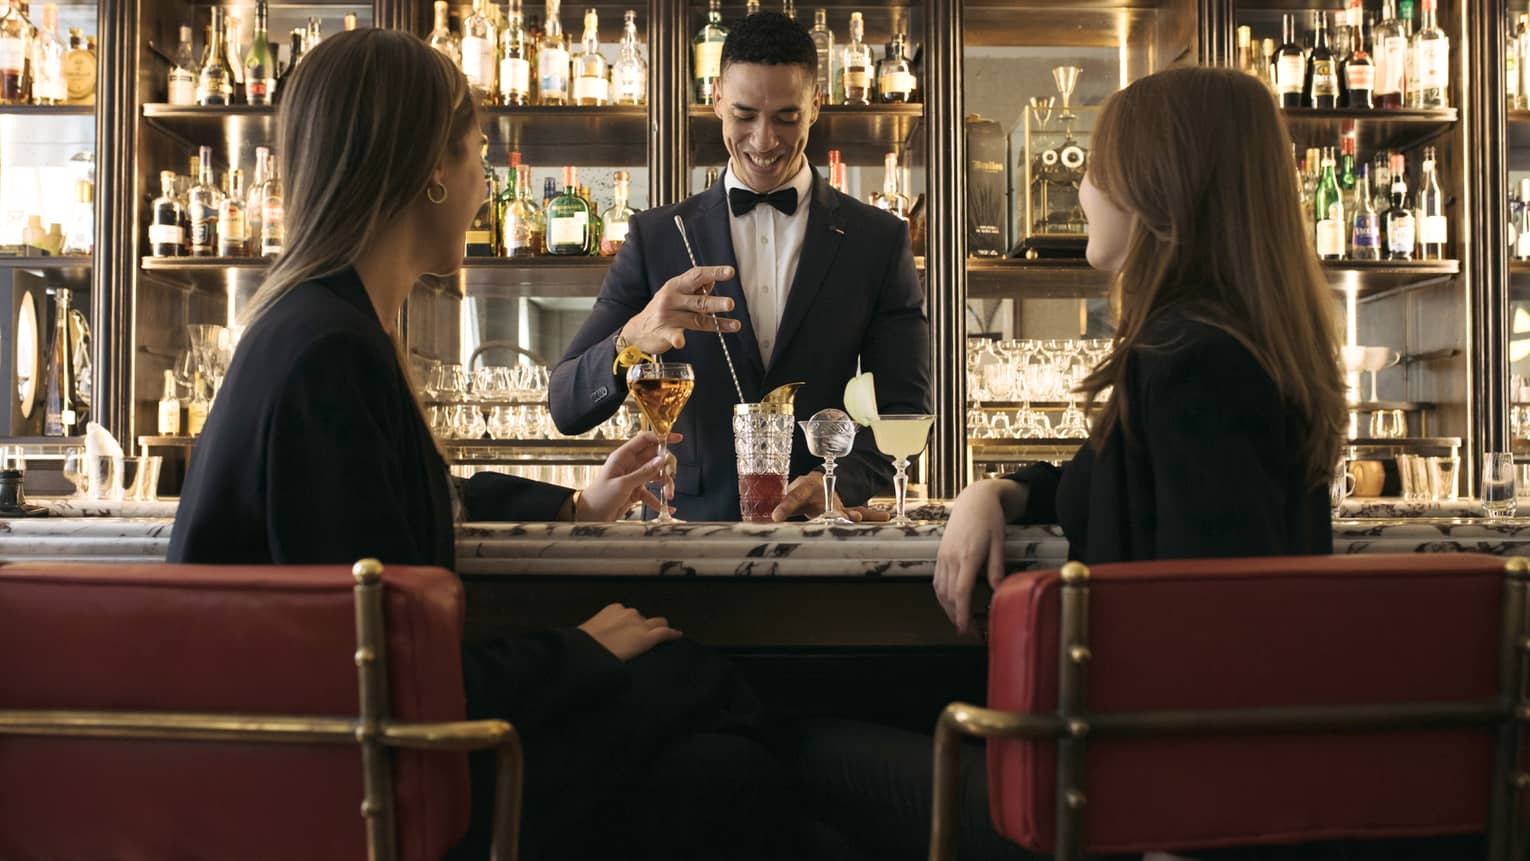 Two women sitting at a bar being served by a bartender.